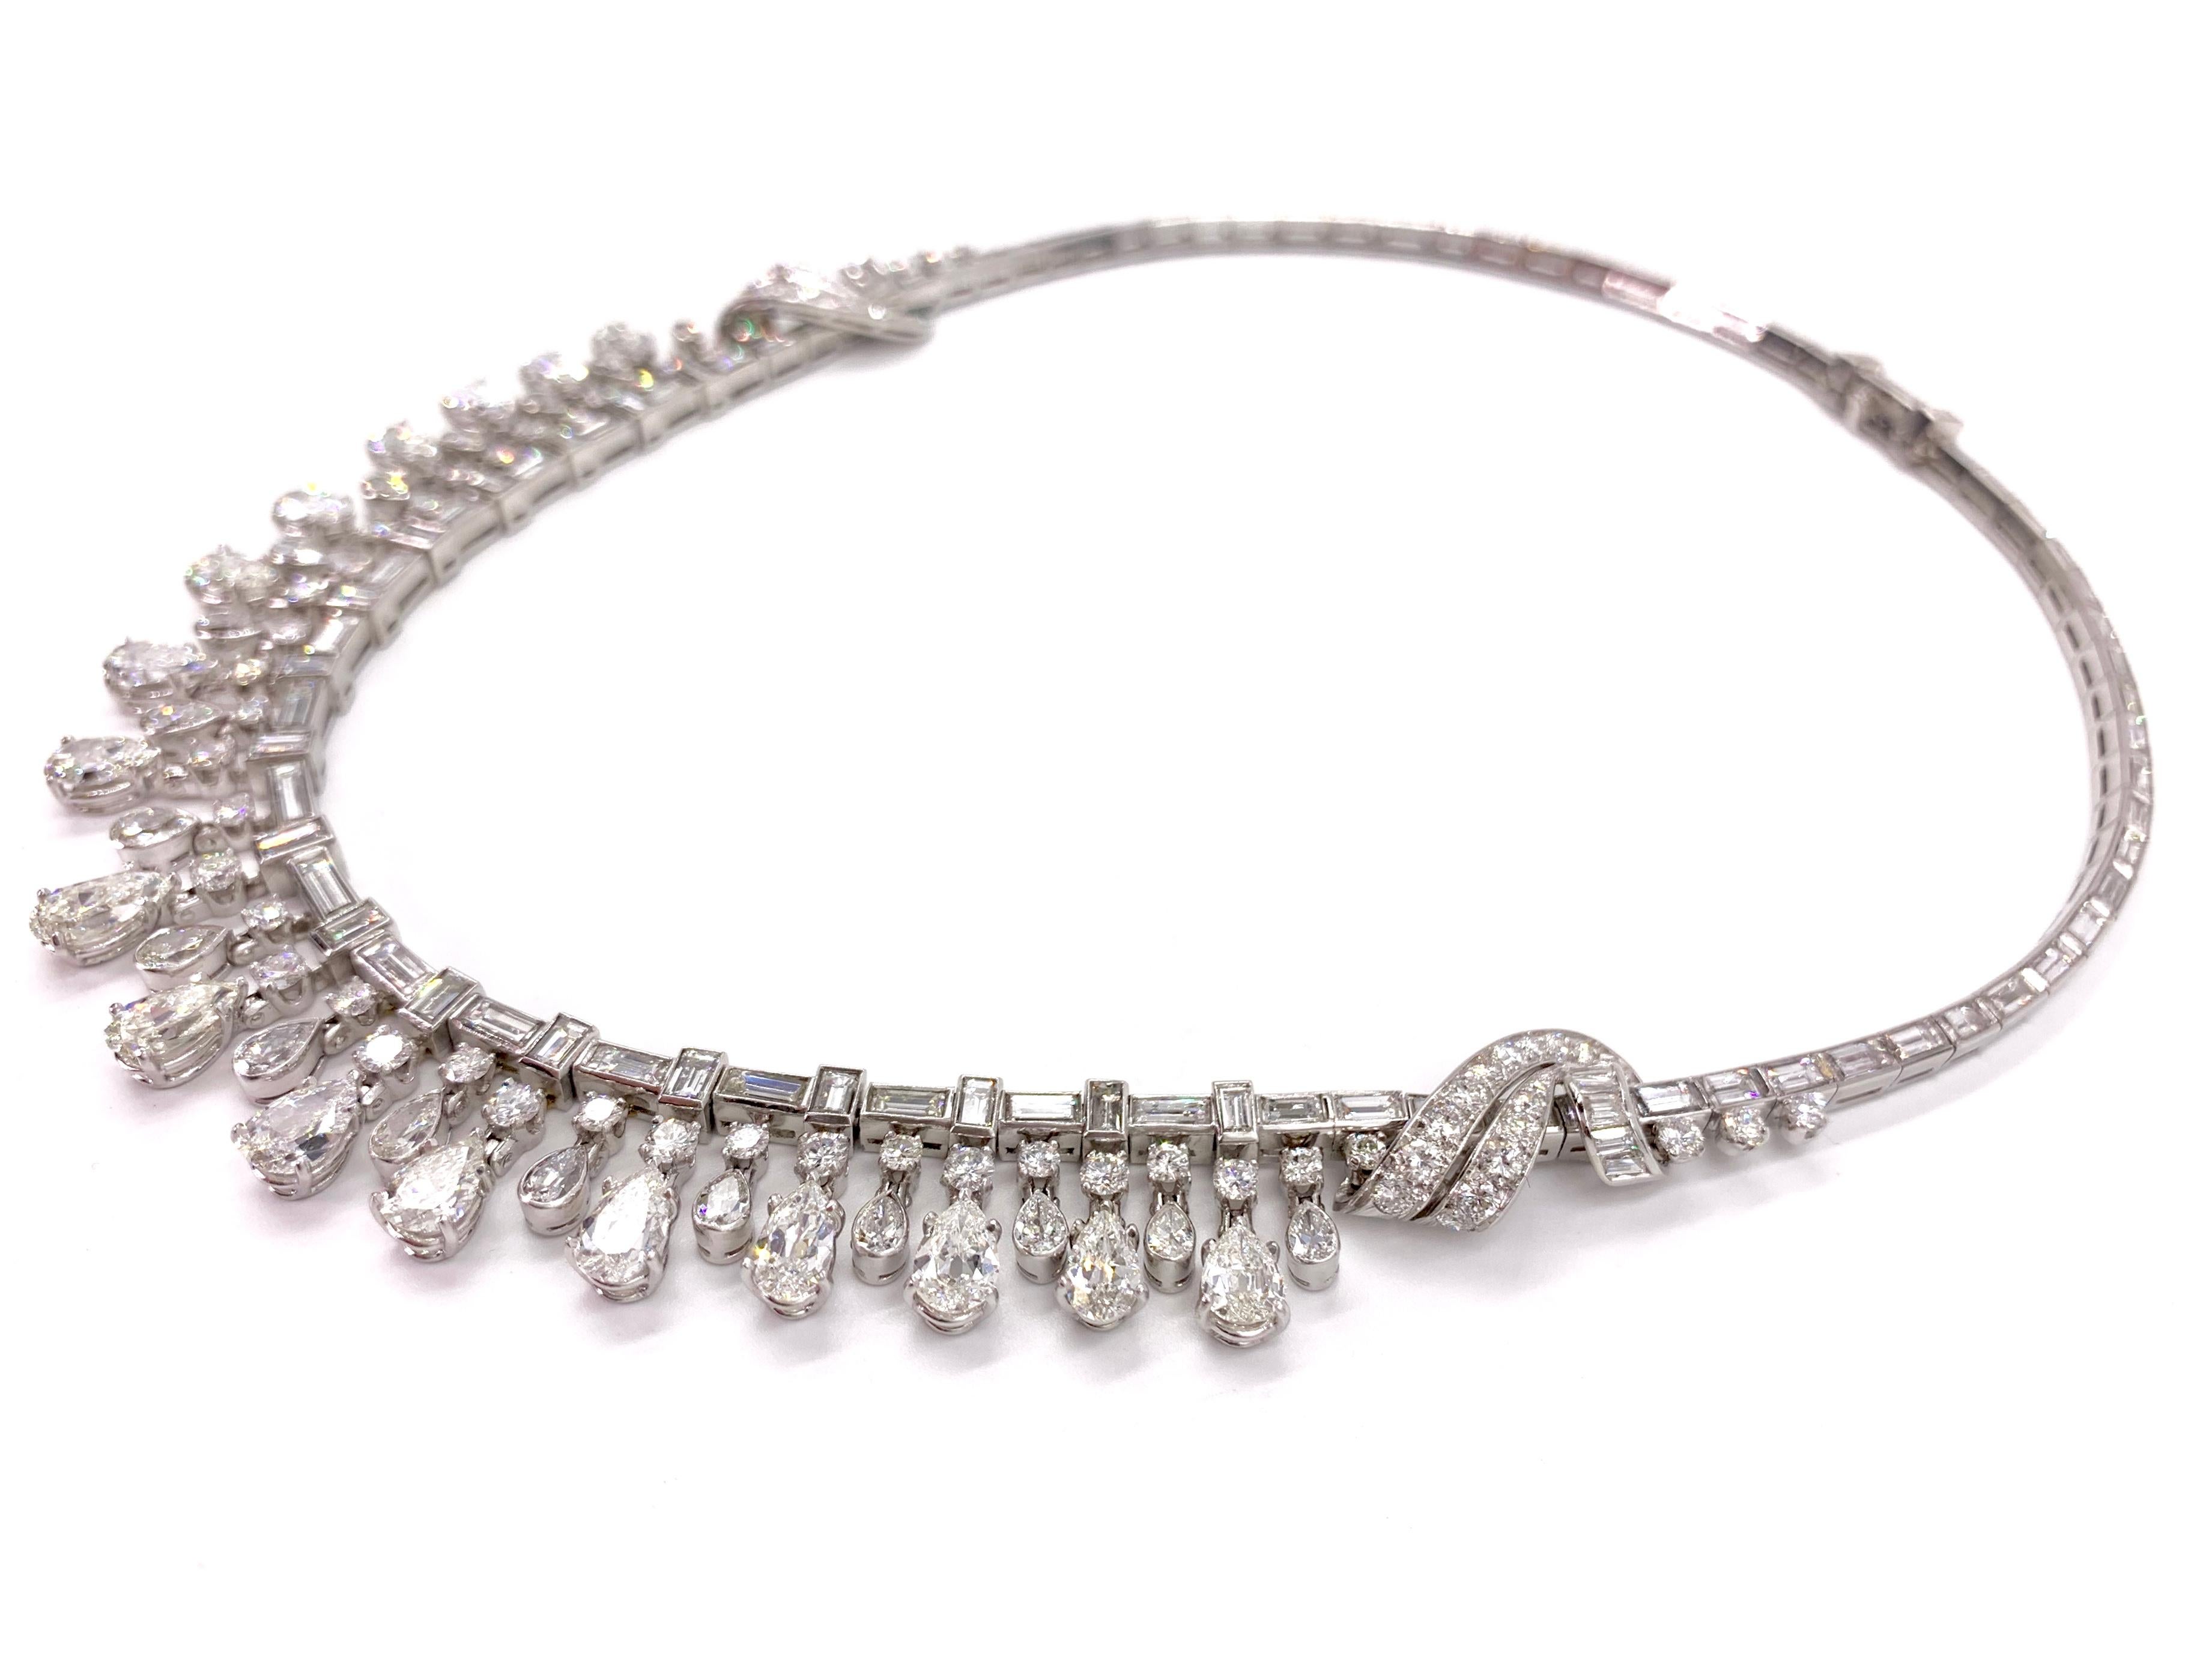 A showstopper platinum necklace featuring approximately 43 carats of brilliant diamonds with a timeless and elegant design. Graduated round and pear shaped diamonds dangle beautifully from the center of the piece. Each link is bezel set with a